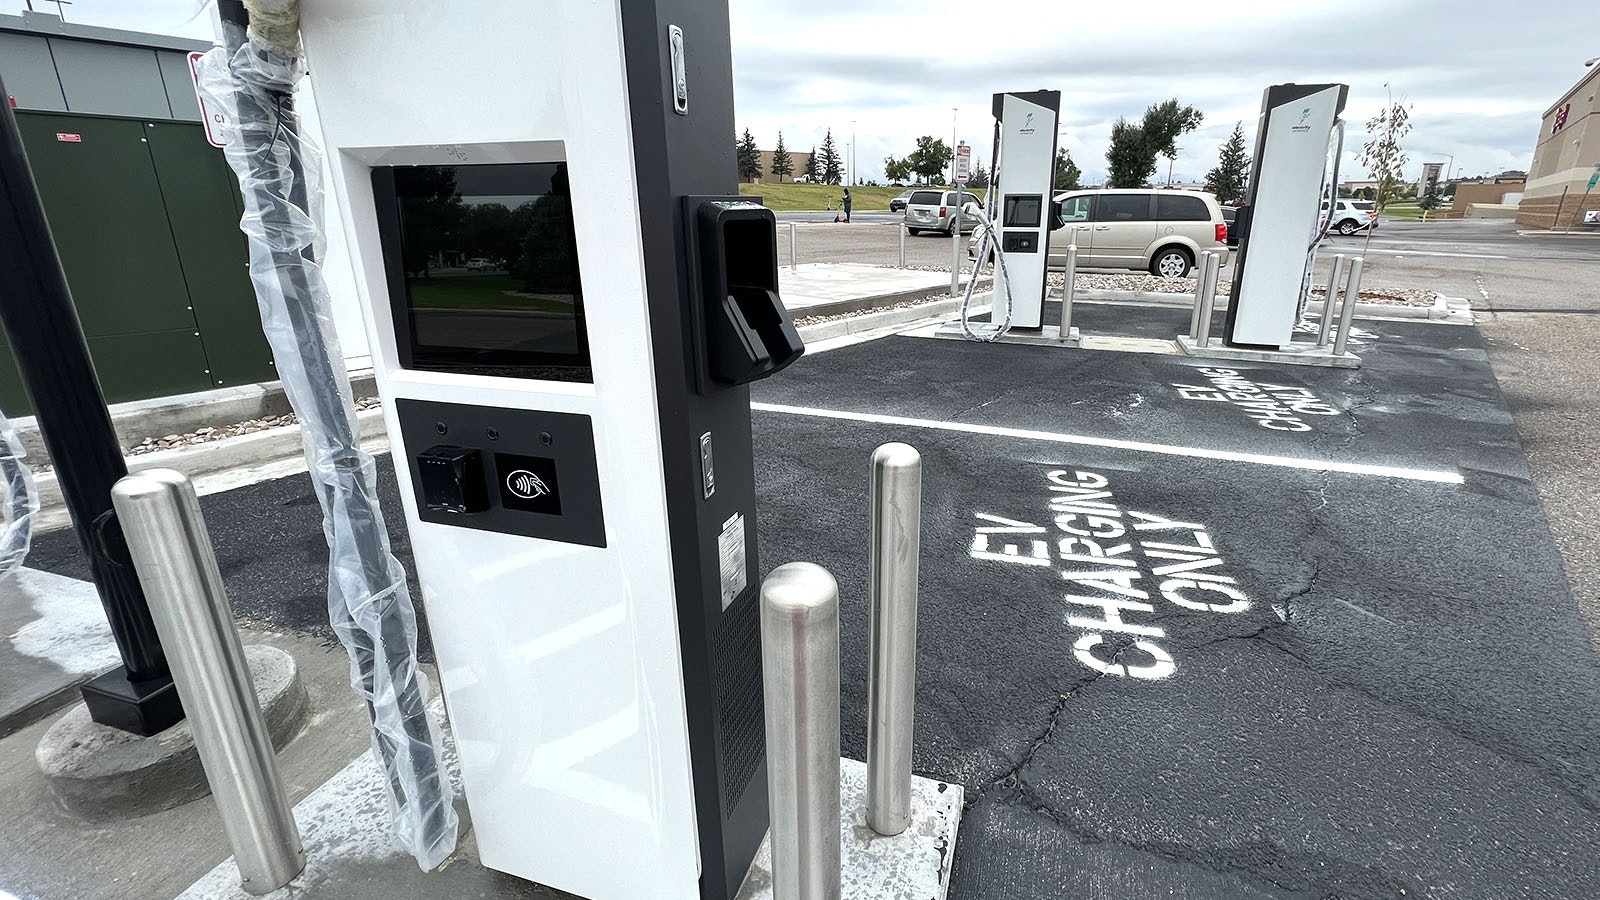 A new Level 3 Electrify America charging station in Cheyenne. While the company is building more of the top-level charging stations around Wyoming, most of its EV chargers are Level 2.